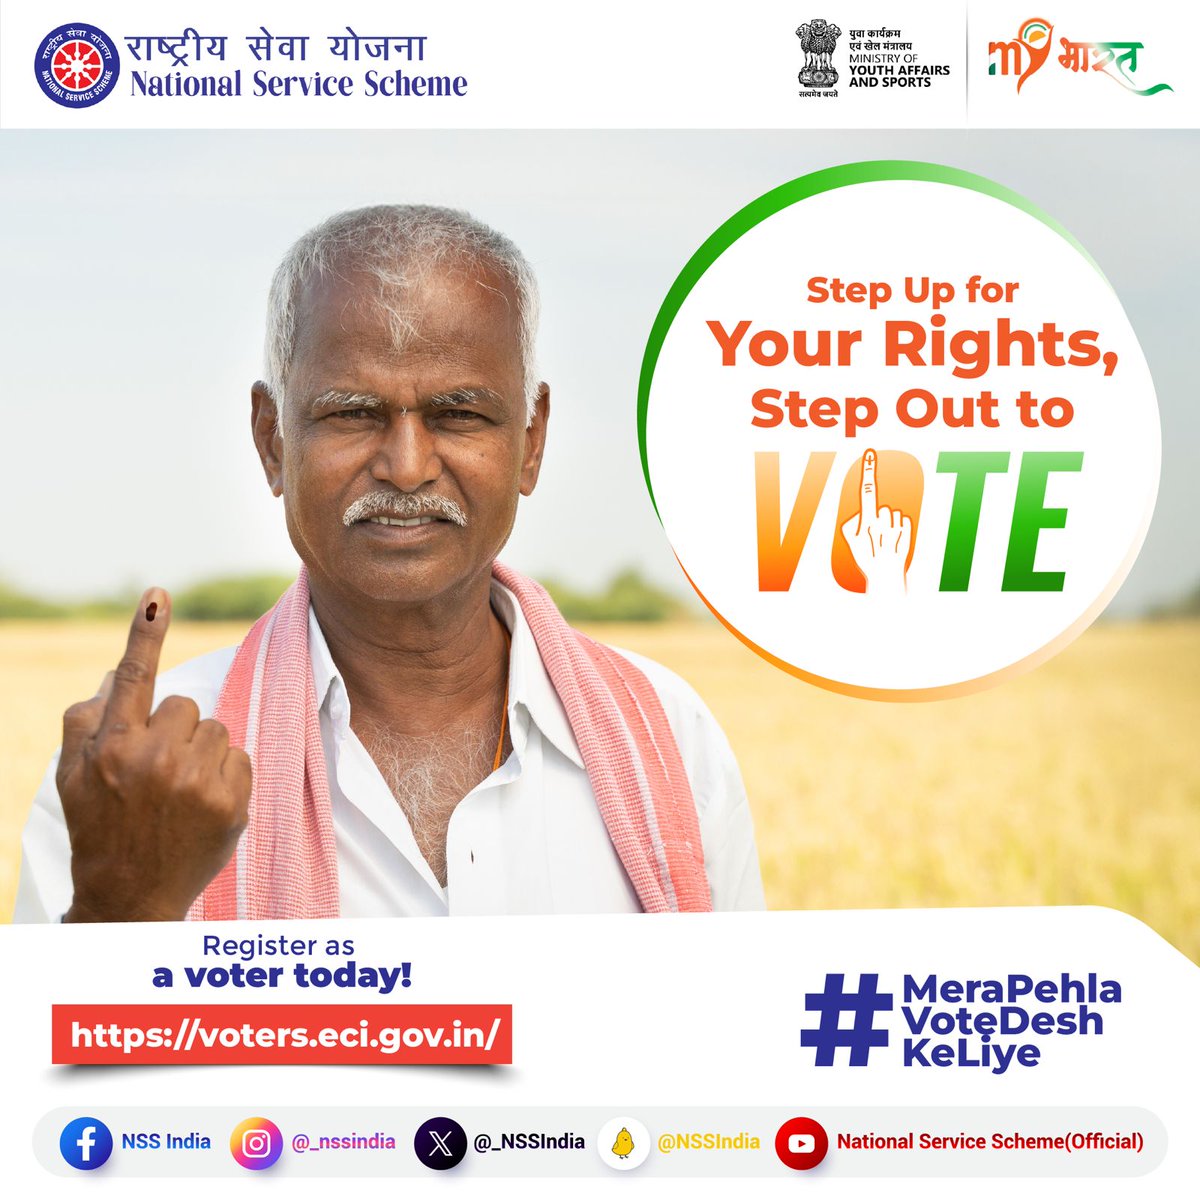 Embrace Your Power, Make Your Mark! The strength of our democracy lies in the hands of its citizens. This is your chance to steer the direction of our country. Register as a voter today! #voterawareness #MeraPehlaVoteDeshKeLiye #Vote4Sure